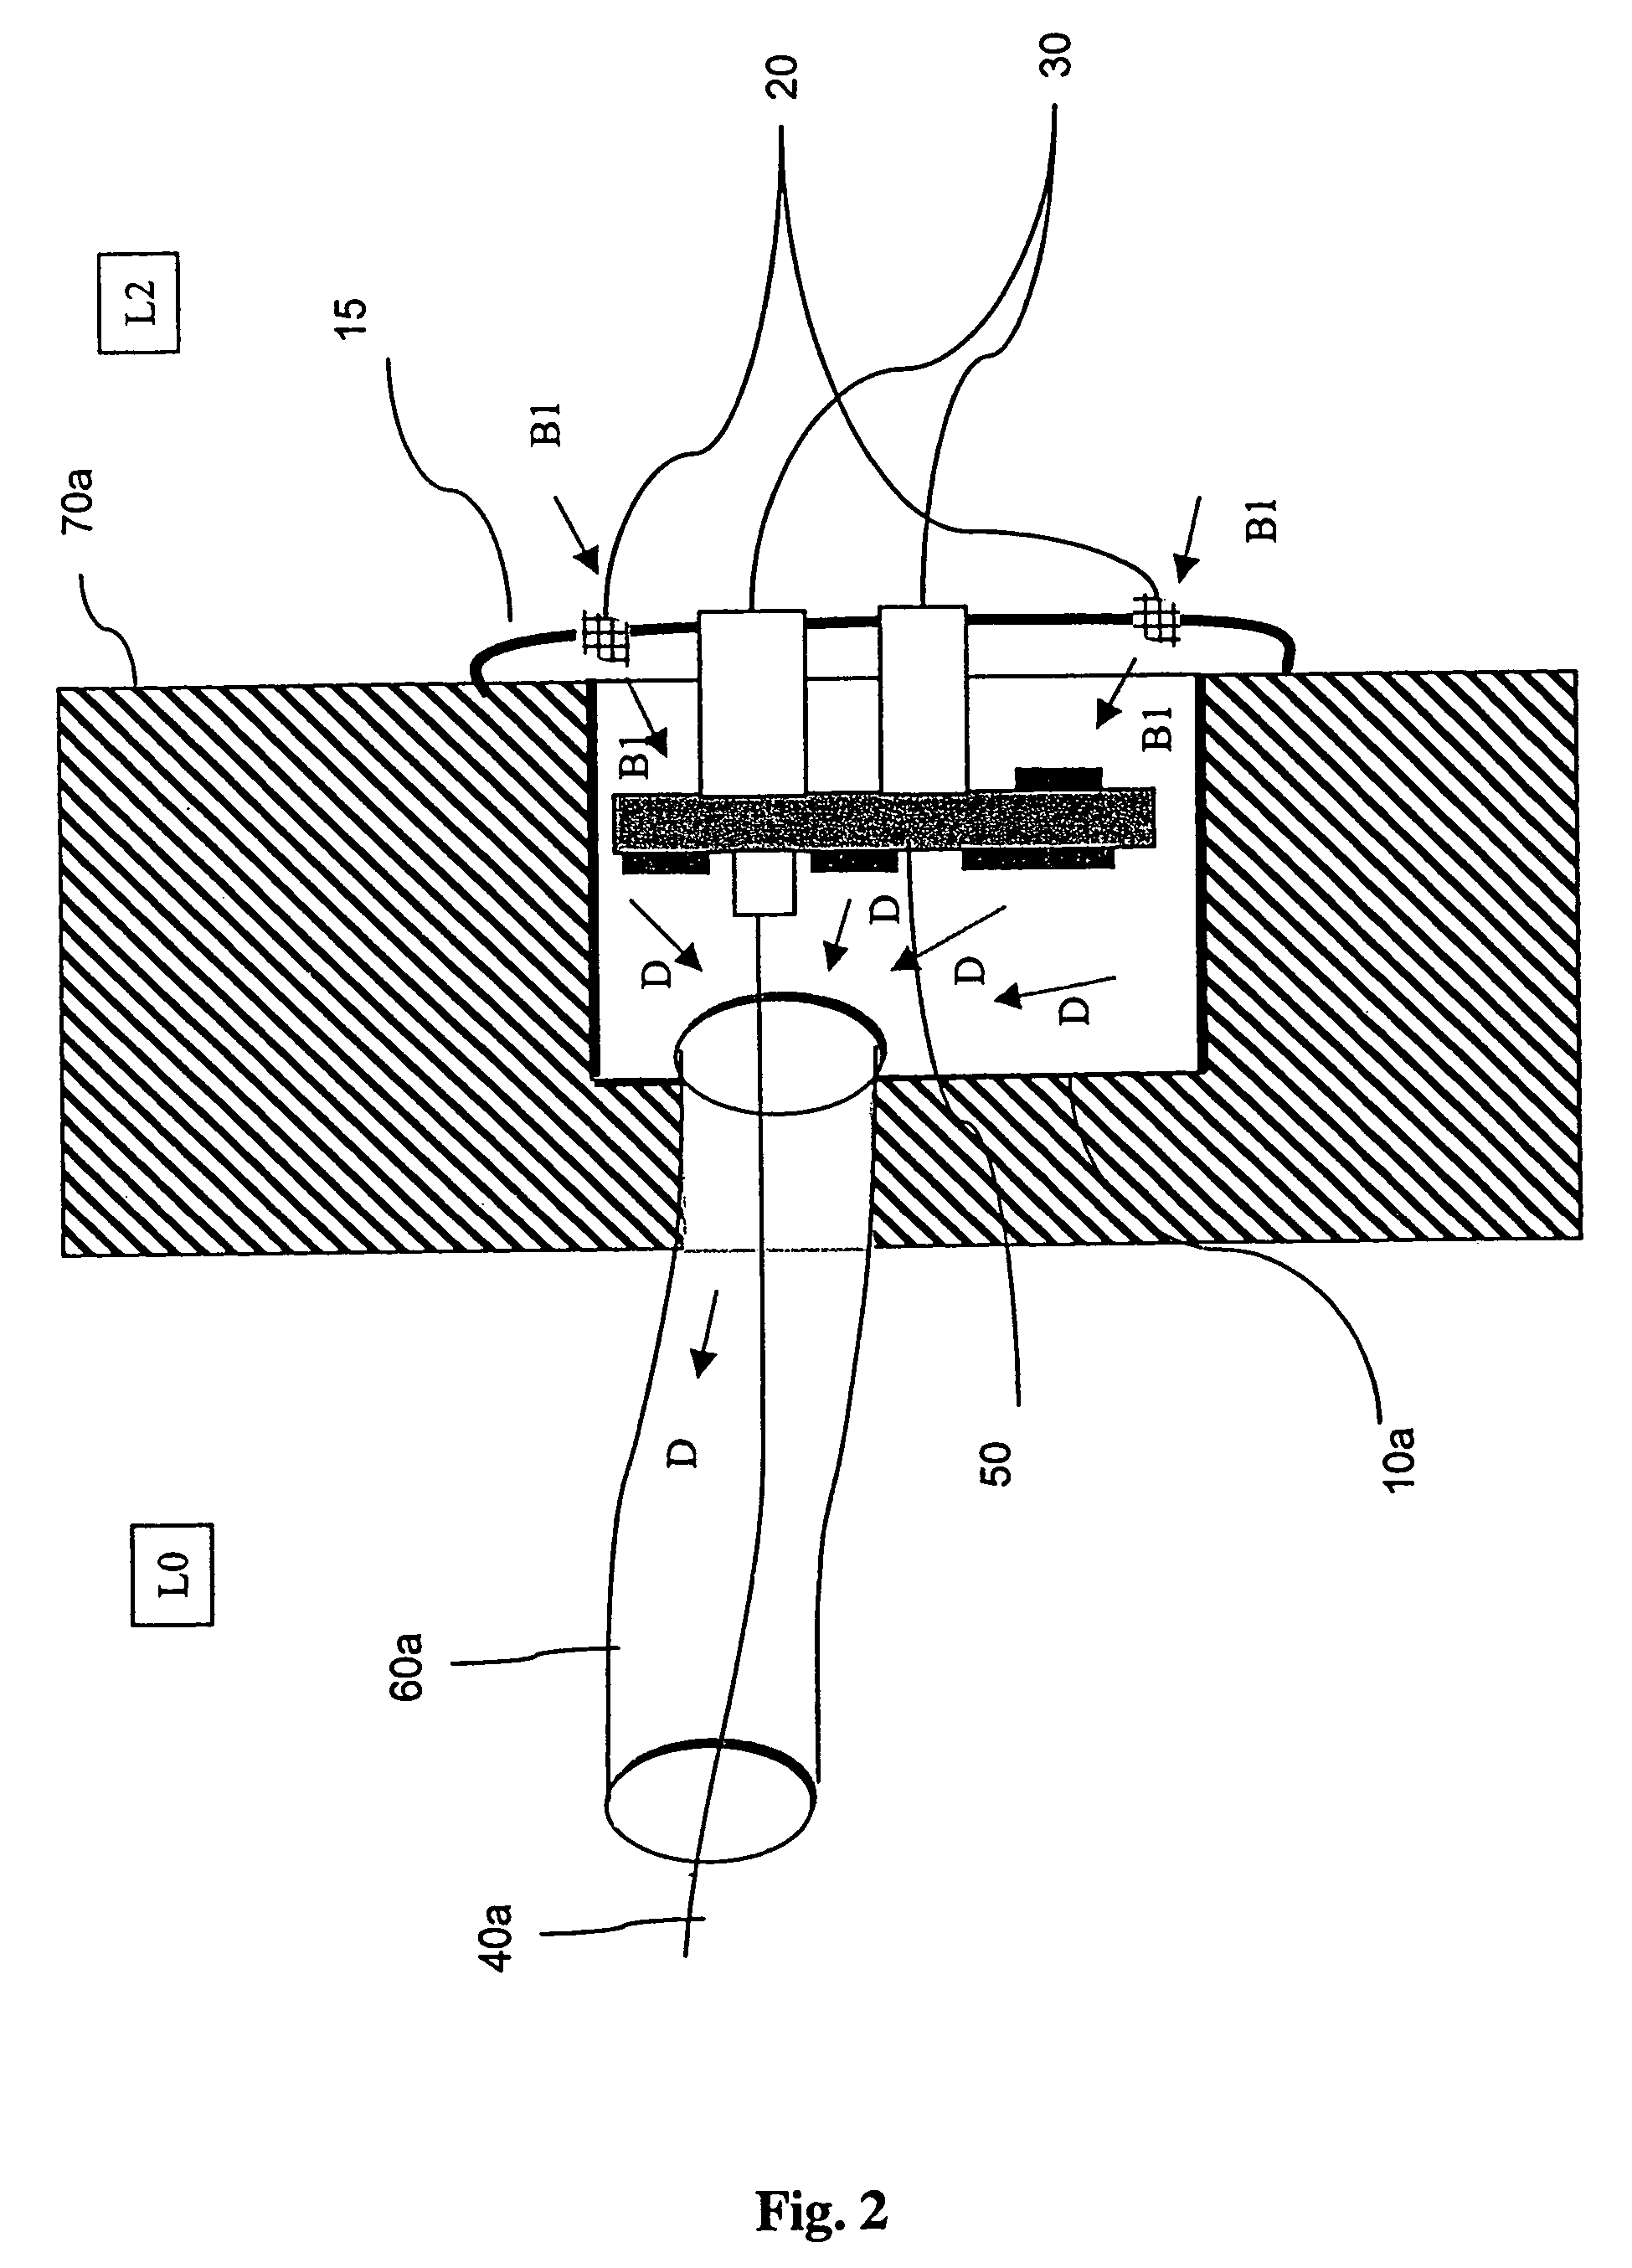 System and apparatus for heat dissipation in an electronic device